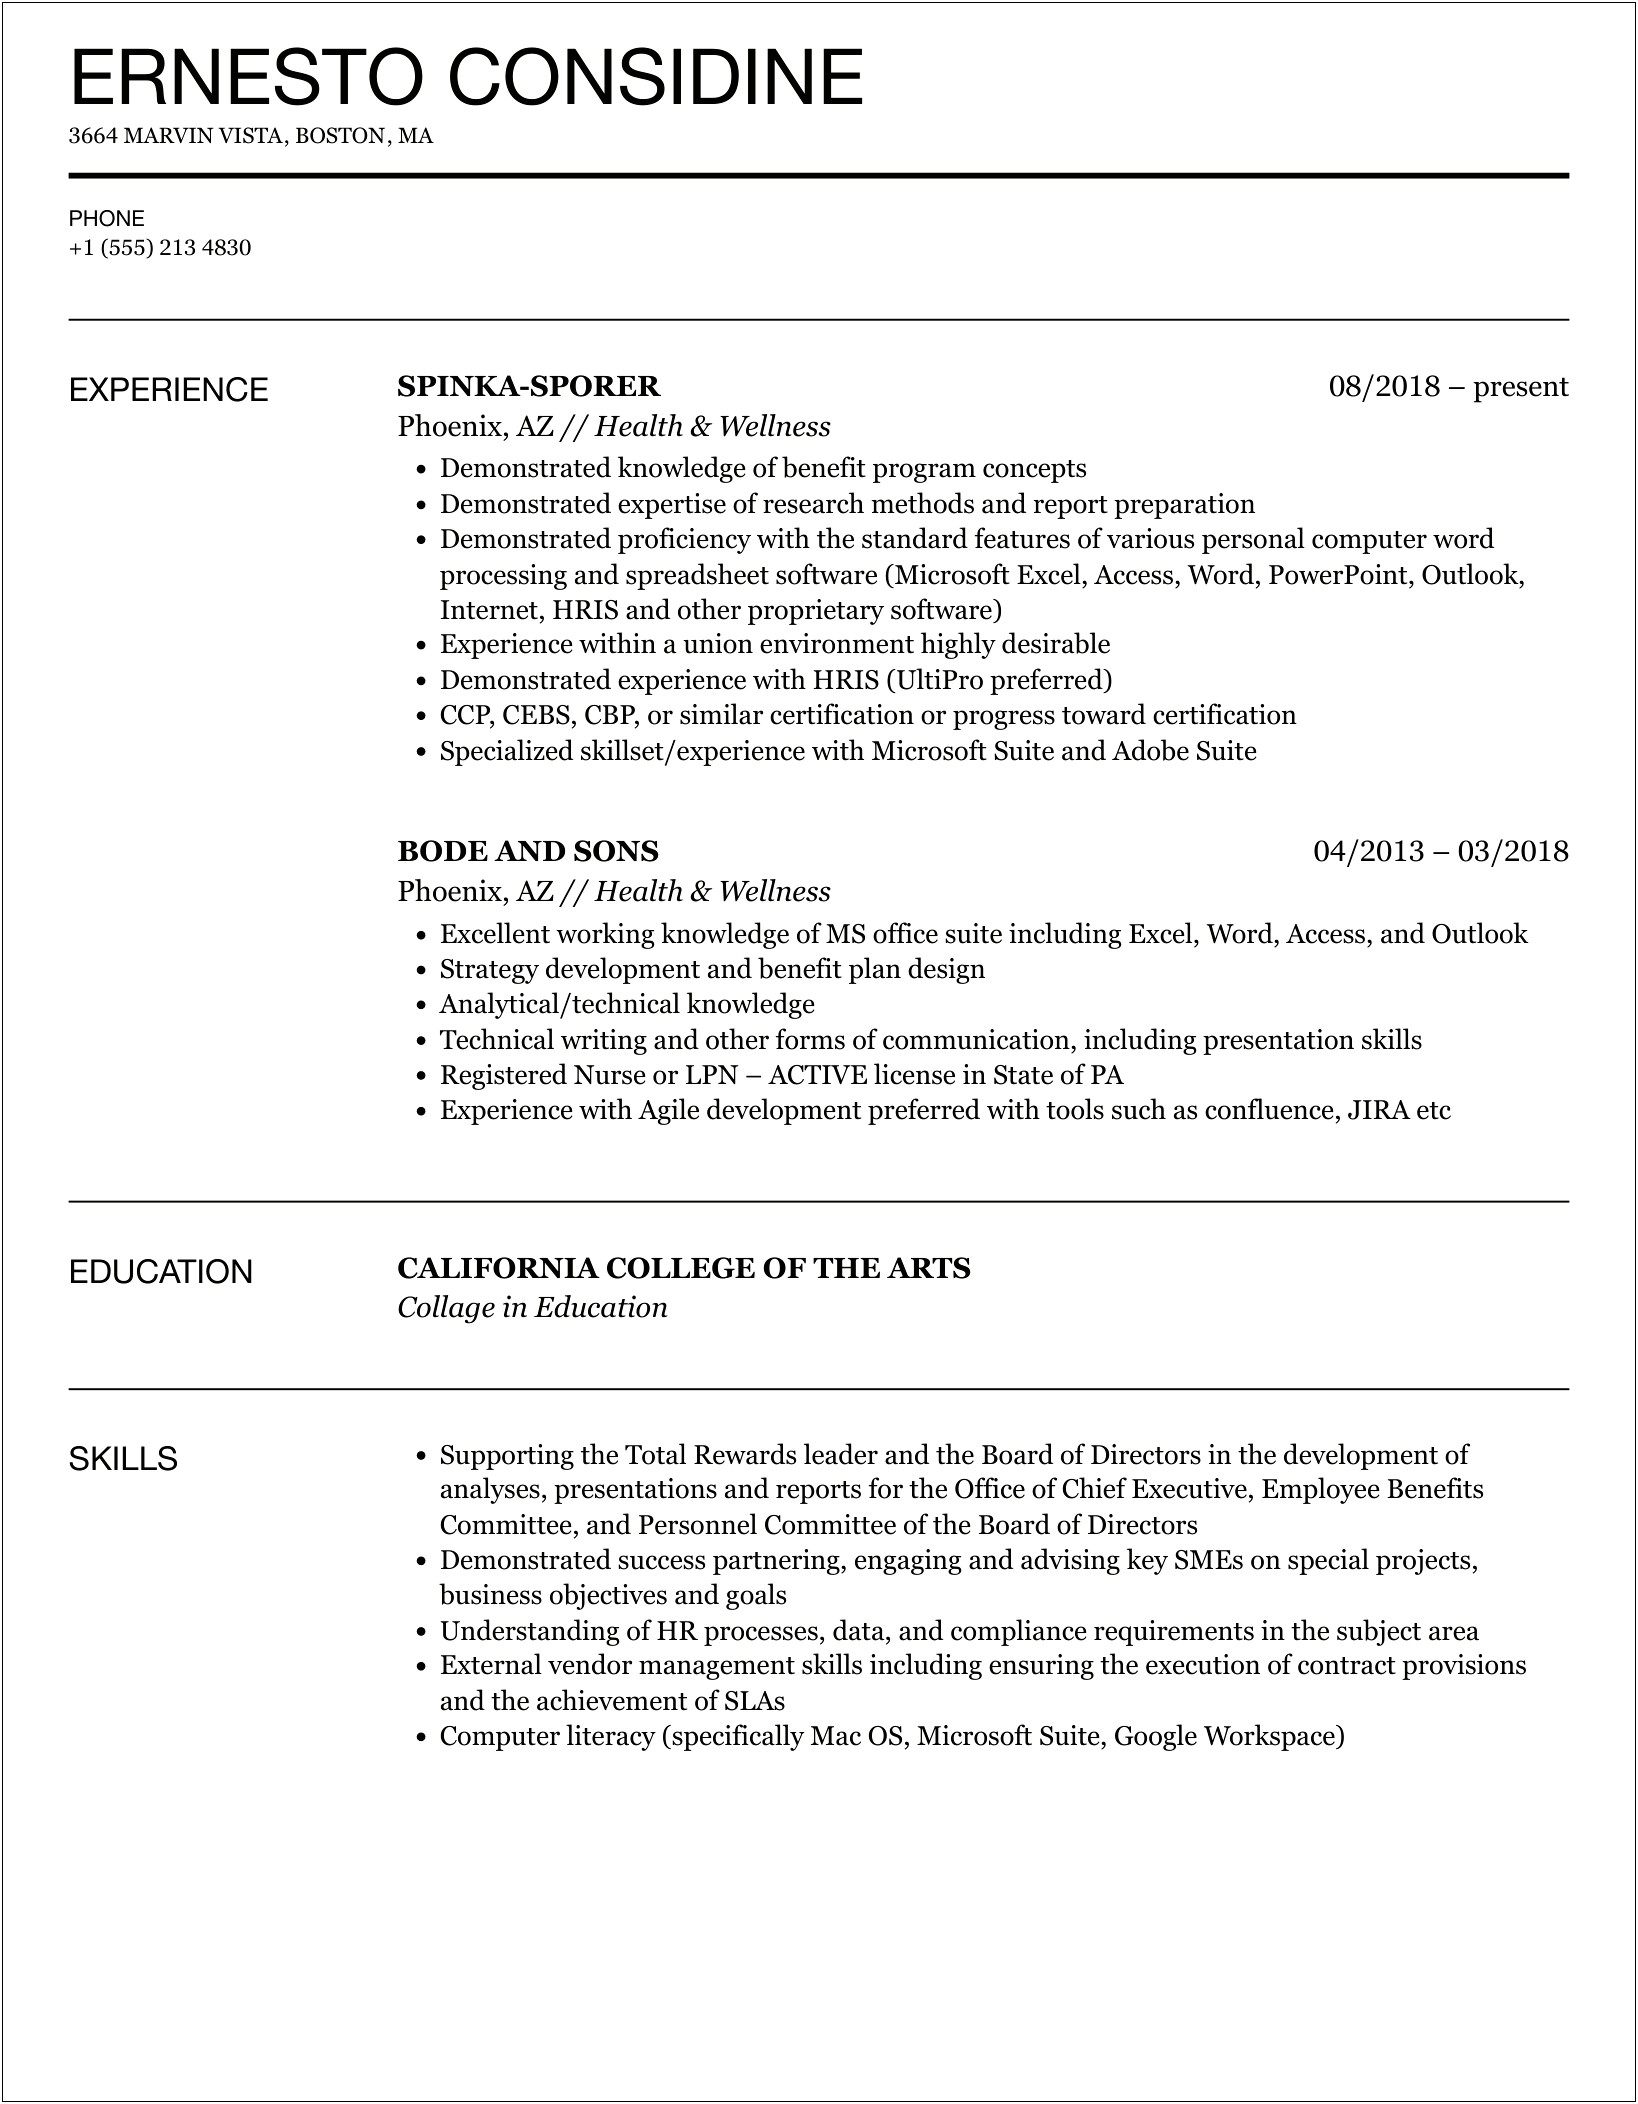 Resume Help Free For Health Wellness And Promotion